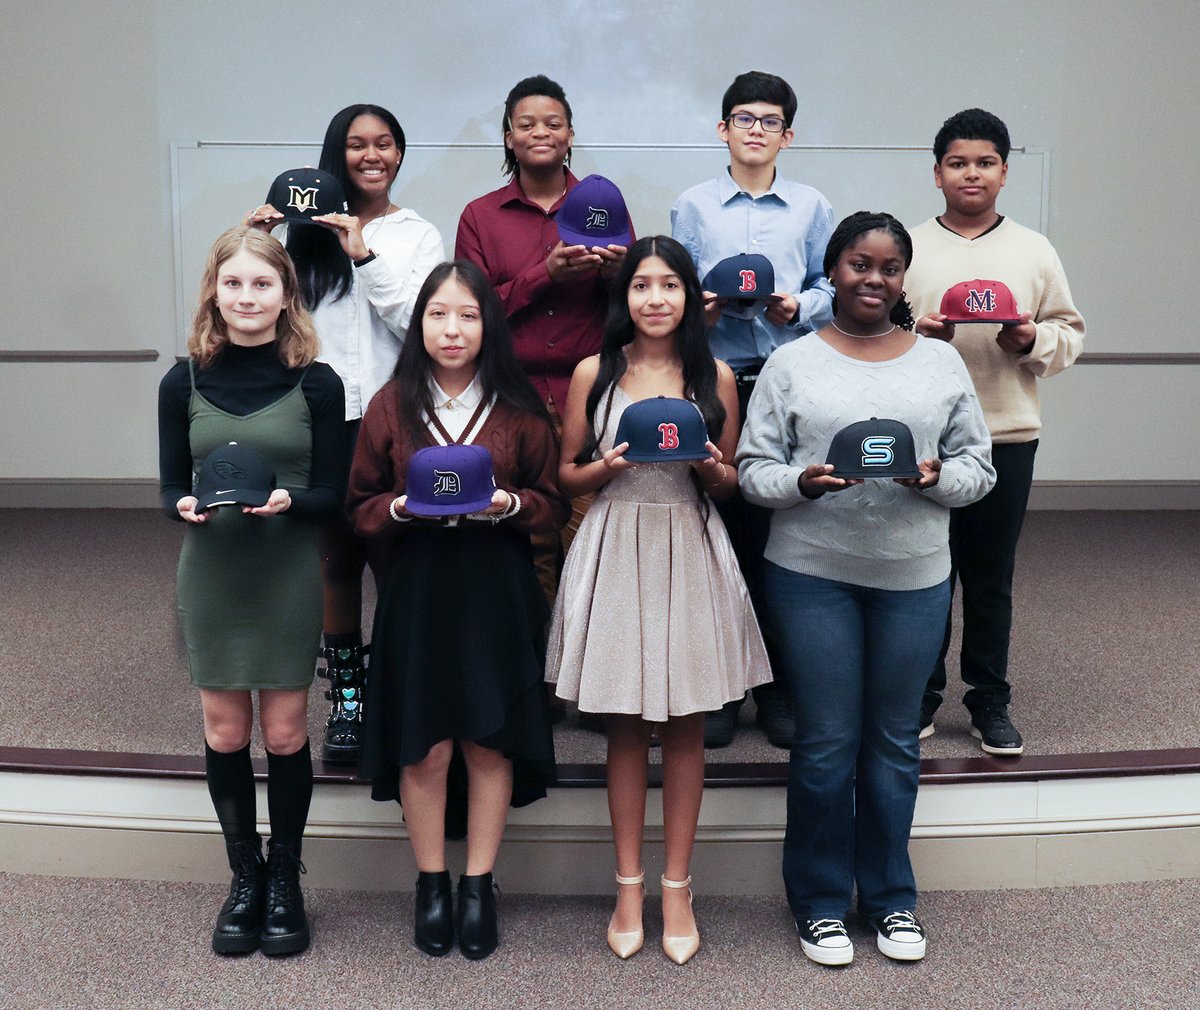 ICYMI... GCPS recently honored eight middle school students who were awarded REACH Scholarships. Each student will receive a $10,000 scholarship to enroll in a Georgia HOPE-eligible public or private university or college. Learn more here: bit.ly/gcps_REACH23